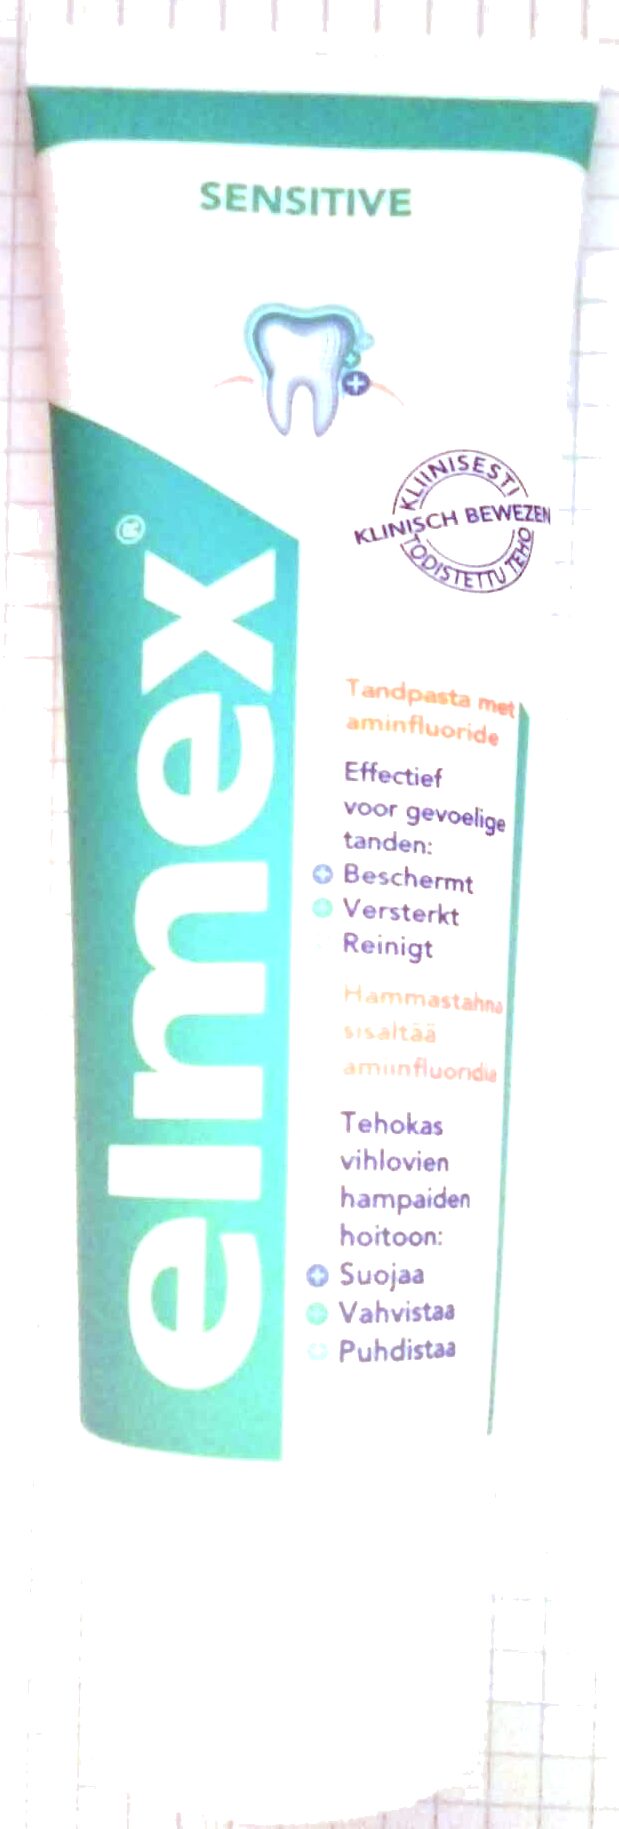 Sensitive Toothpaste with Aminfluoride - Product - en